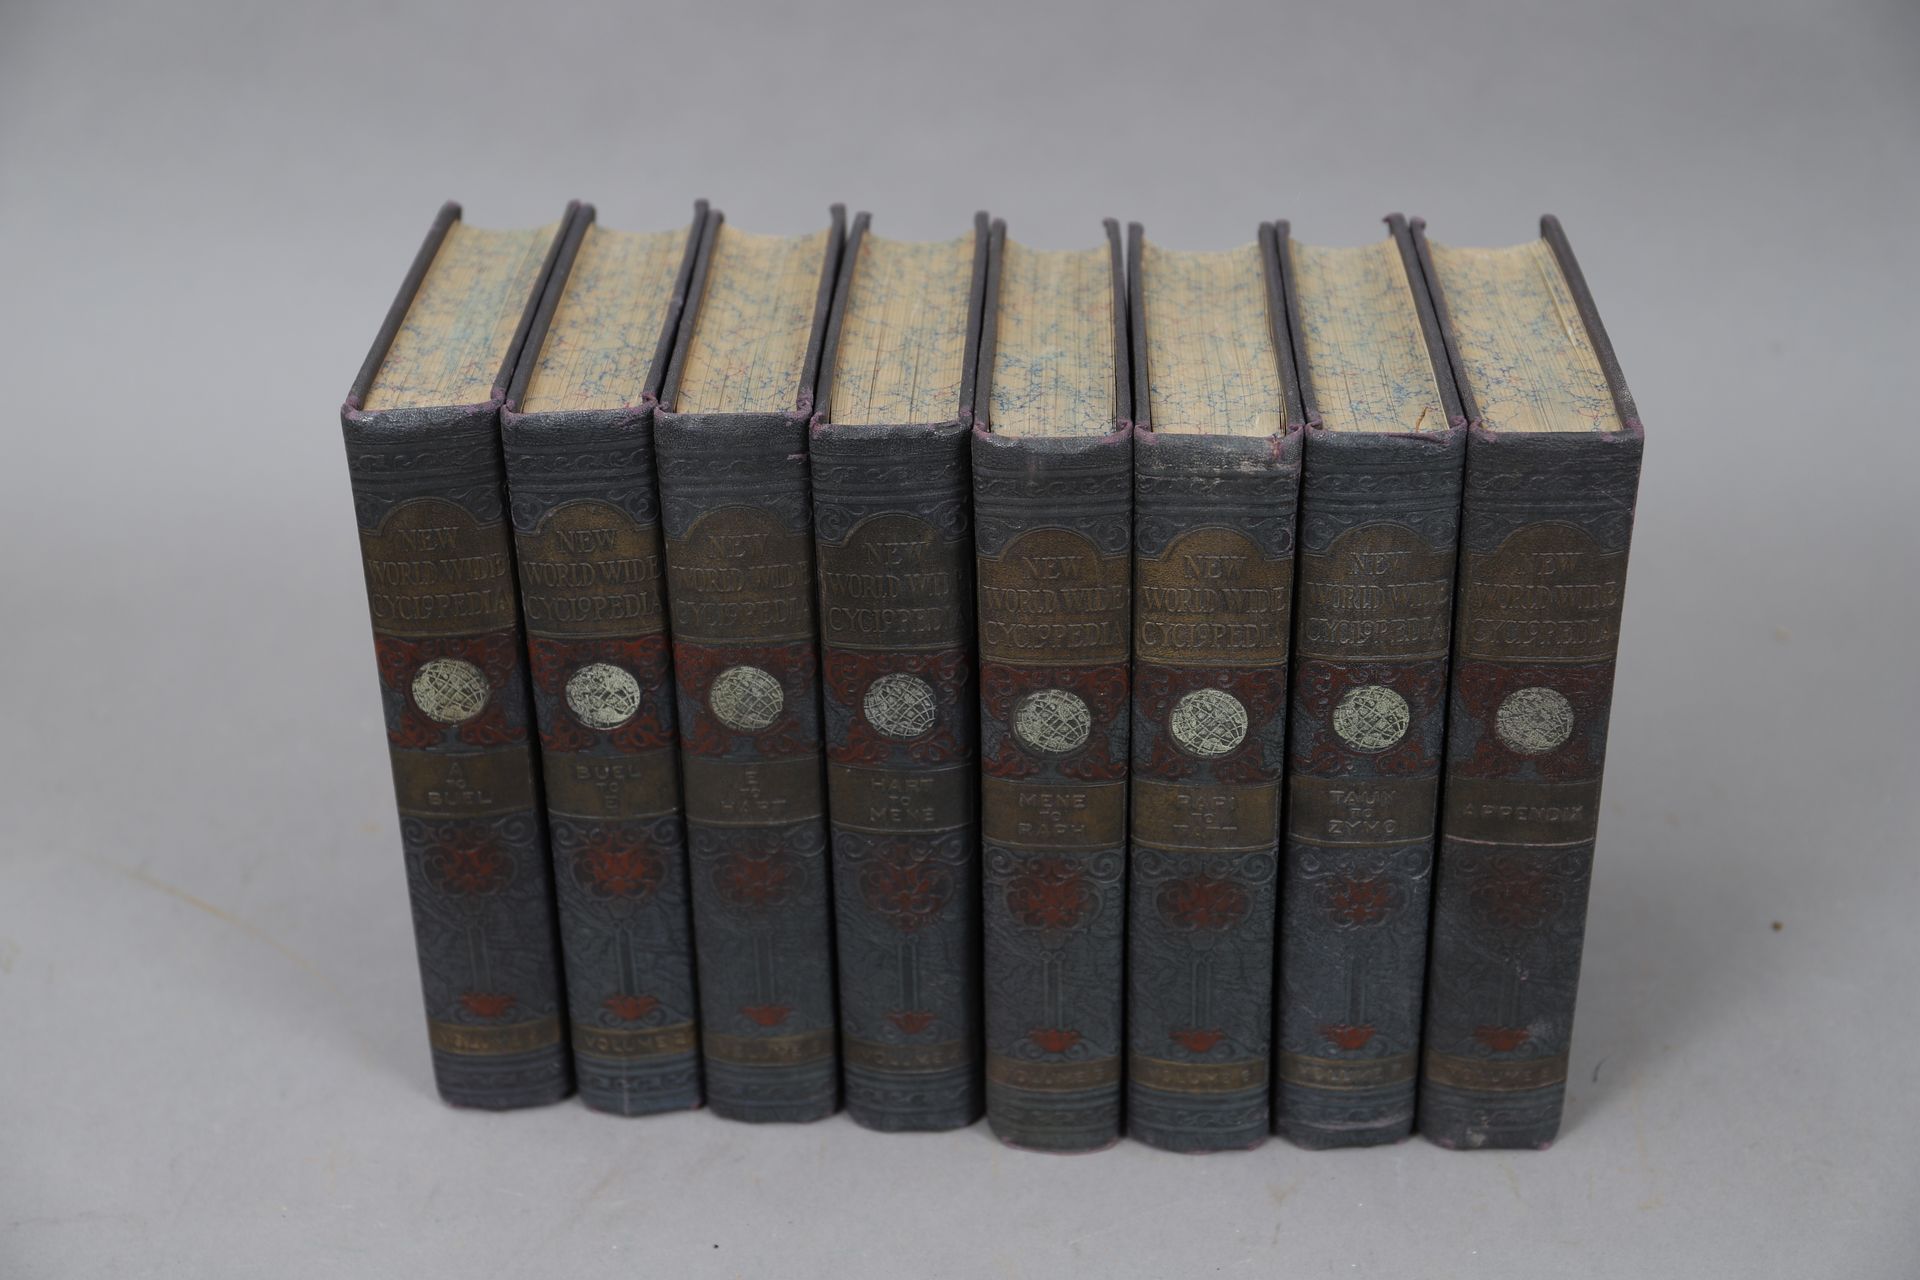 Null THE NEW WORLD-WIDE CYCLOPEDIA.

CHICAGO 1928, 

8 volumes reliés.